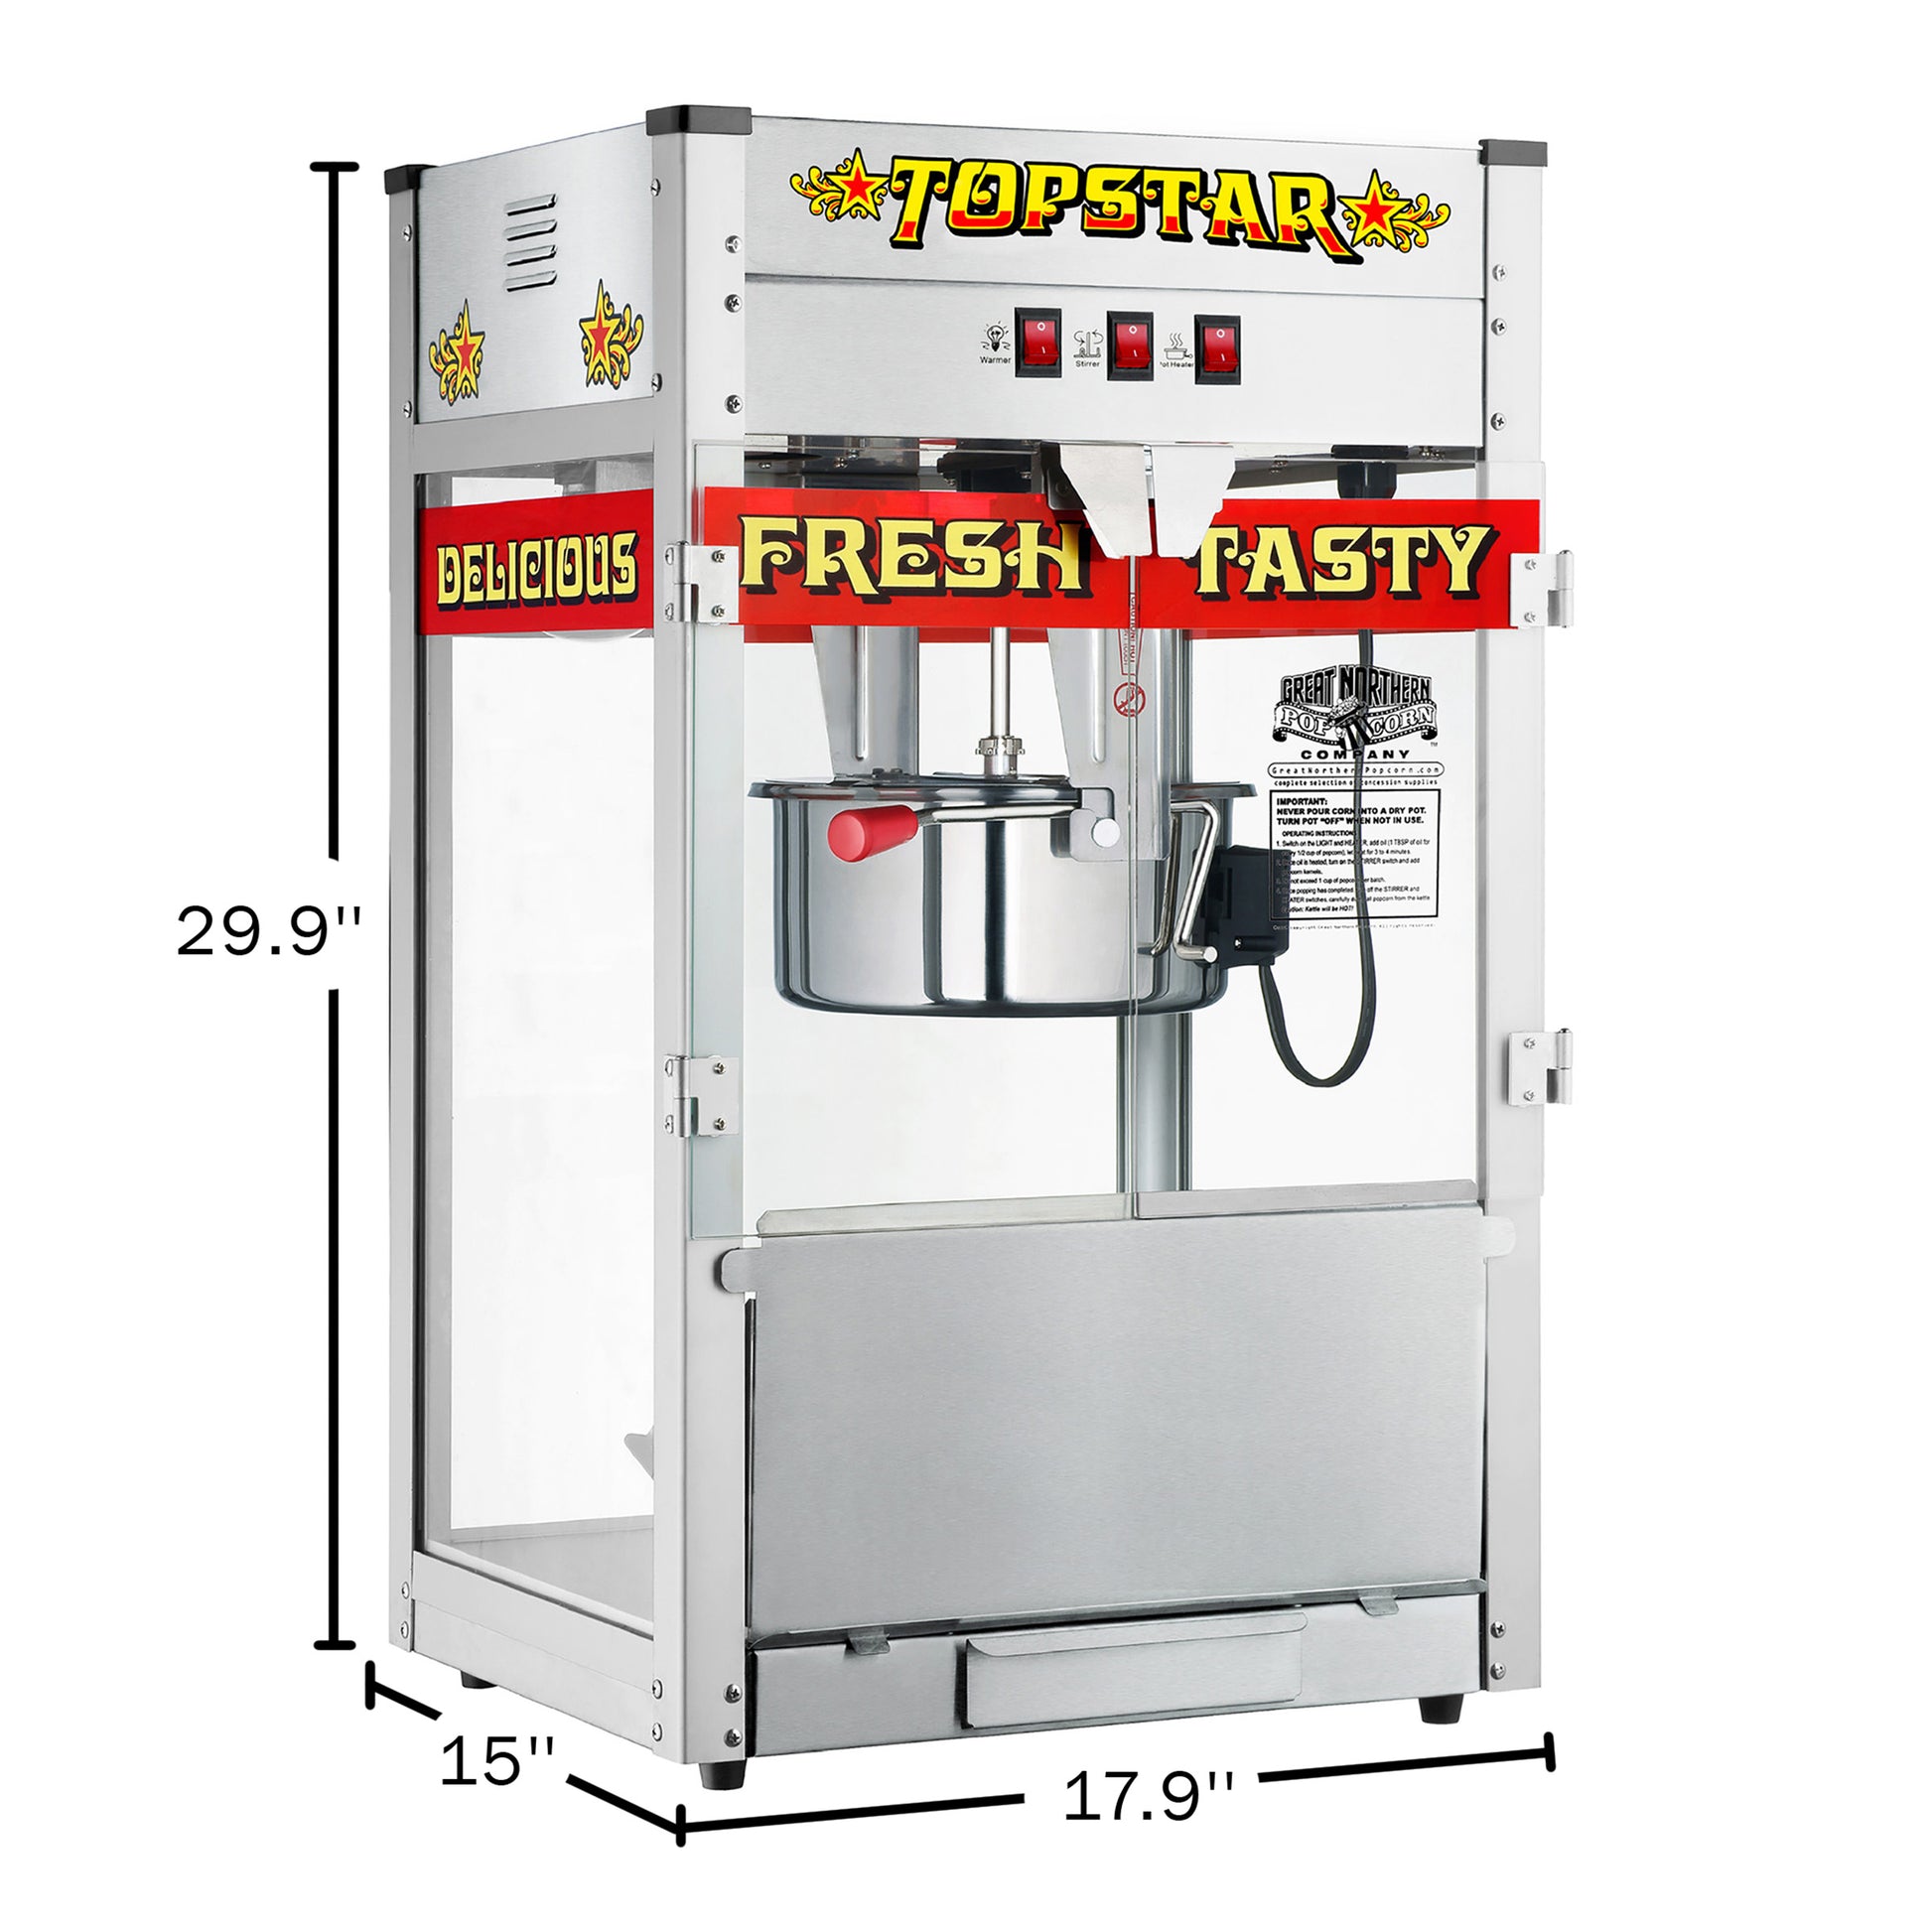 Safe and Energy Saving Popcorn Machine Commercial Household